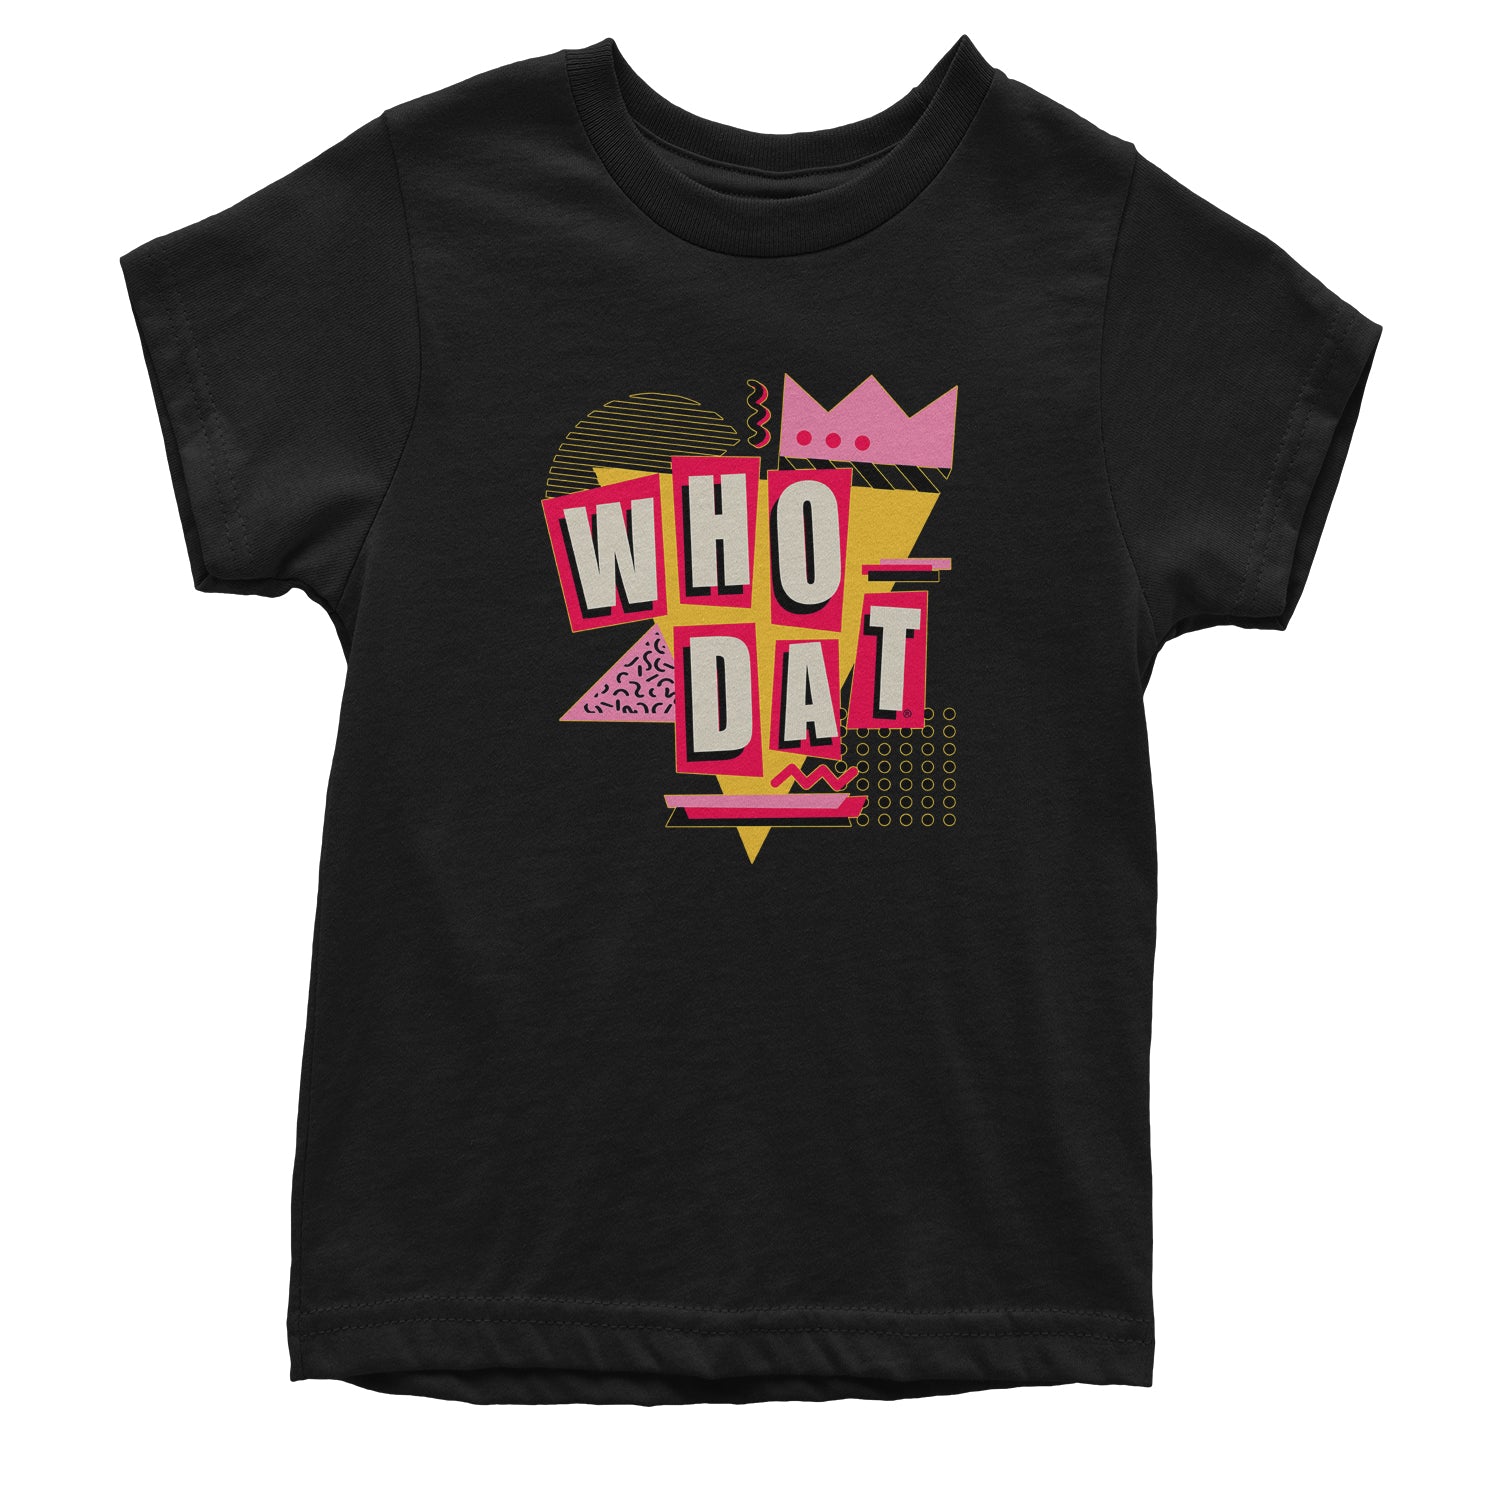 Who Dat New Orleans Youth T-shirt brees, colston, drew, louisiana, marques, payton, sean by Expression Tees